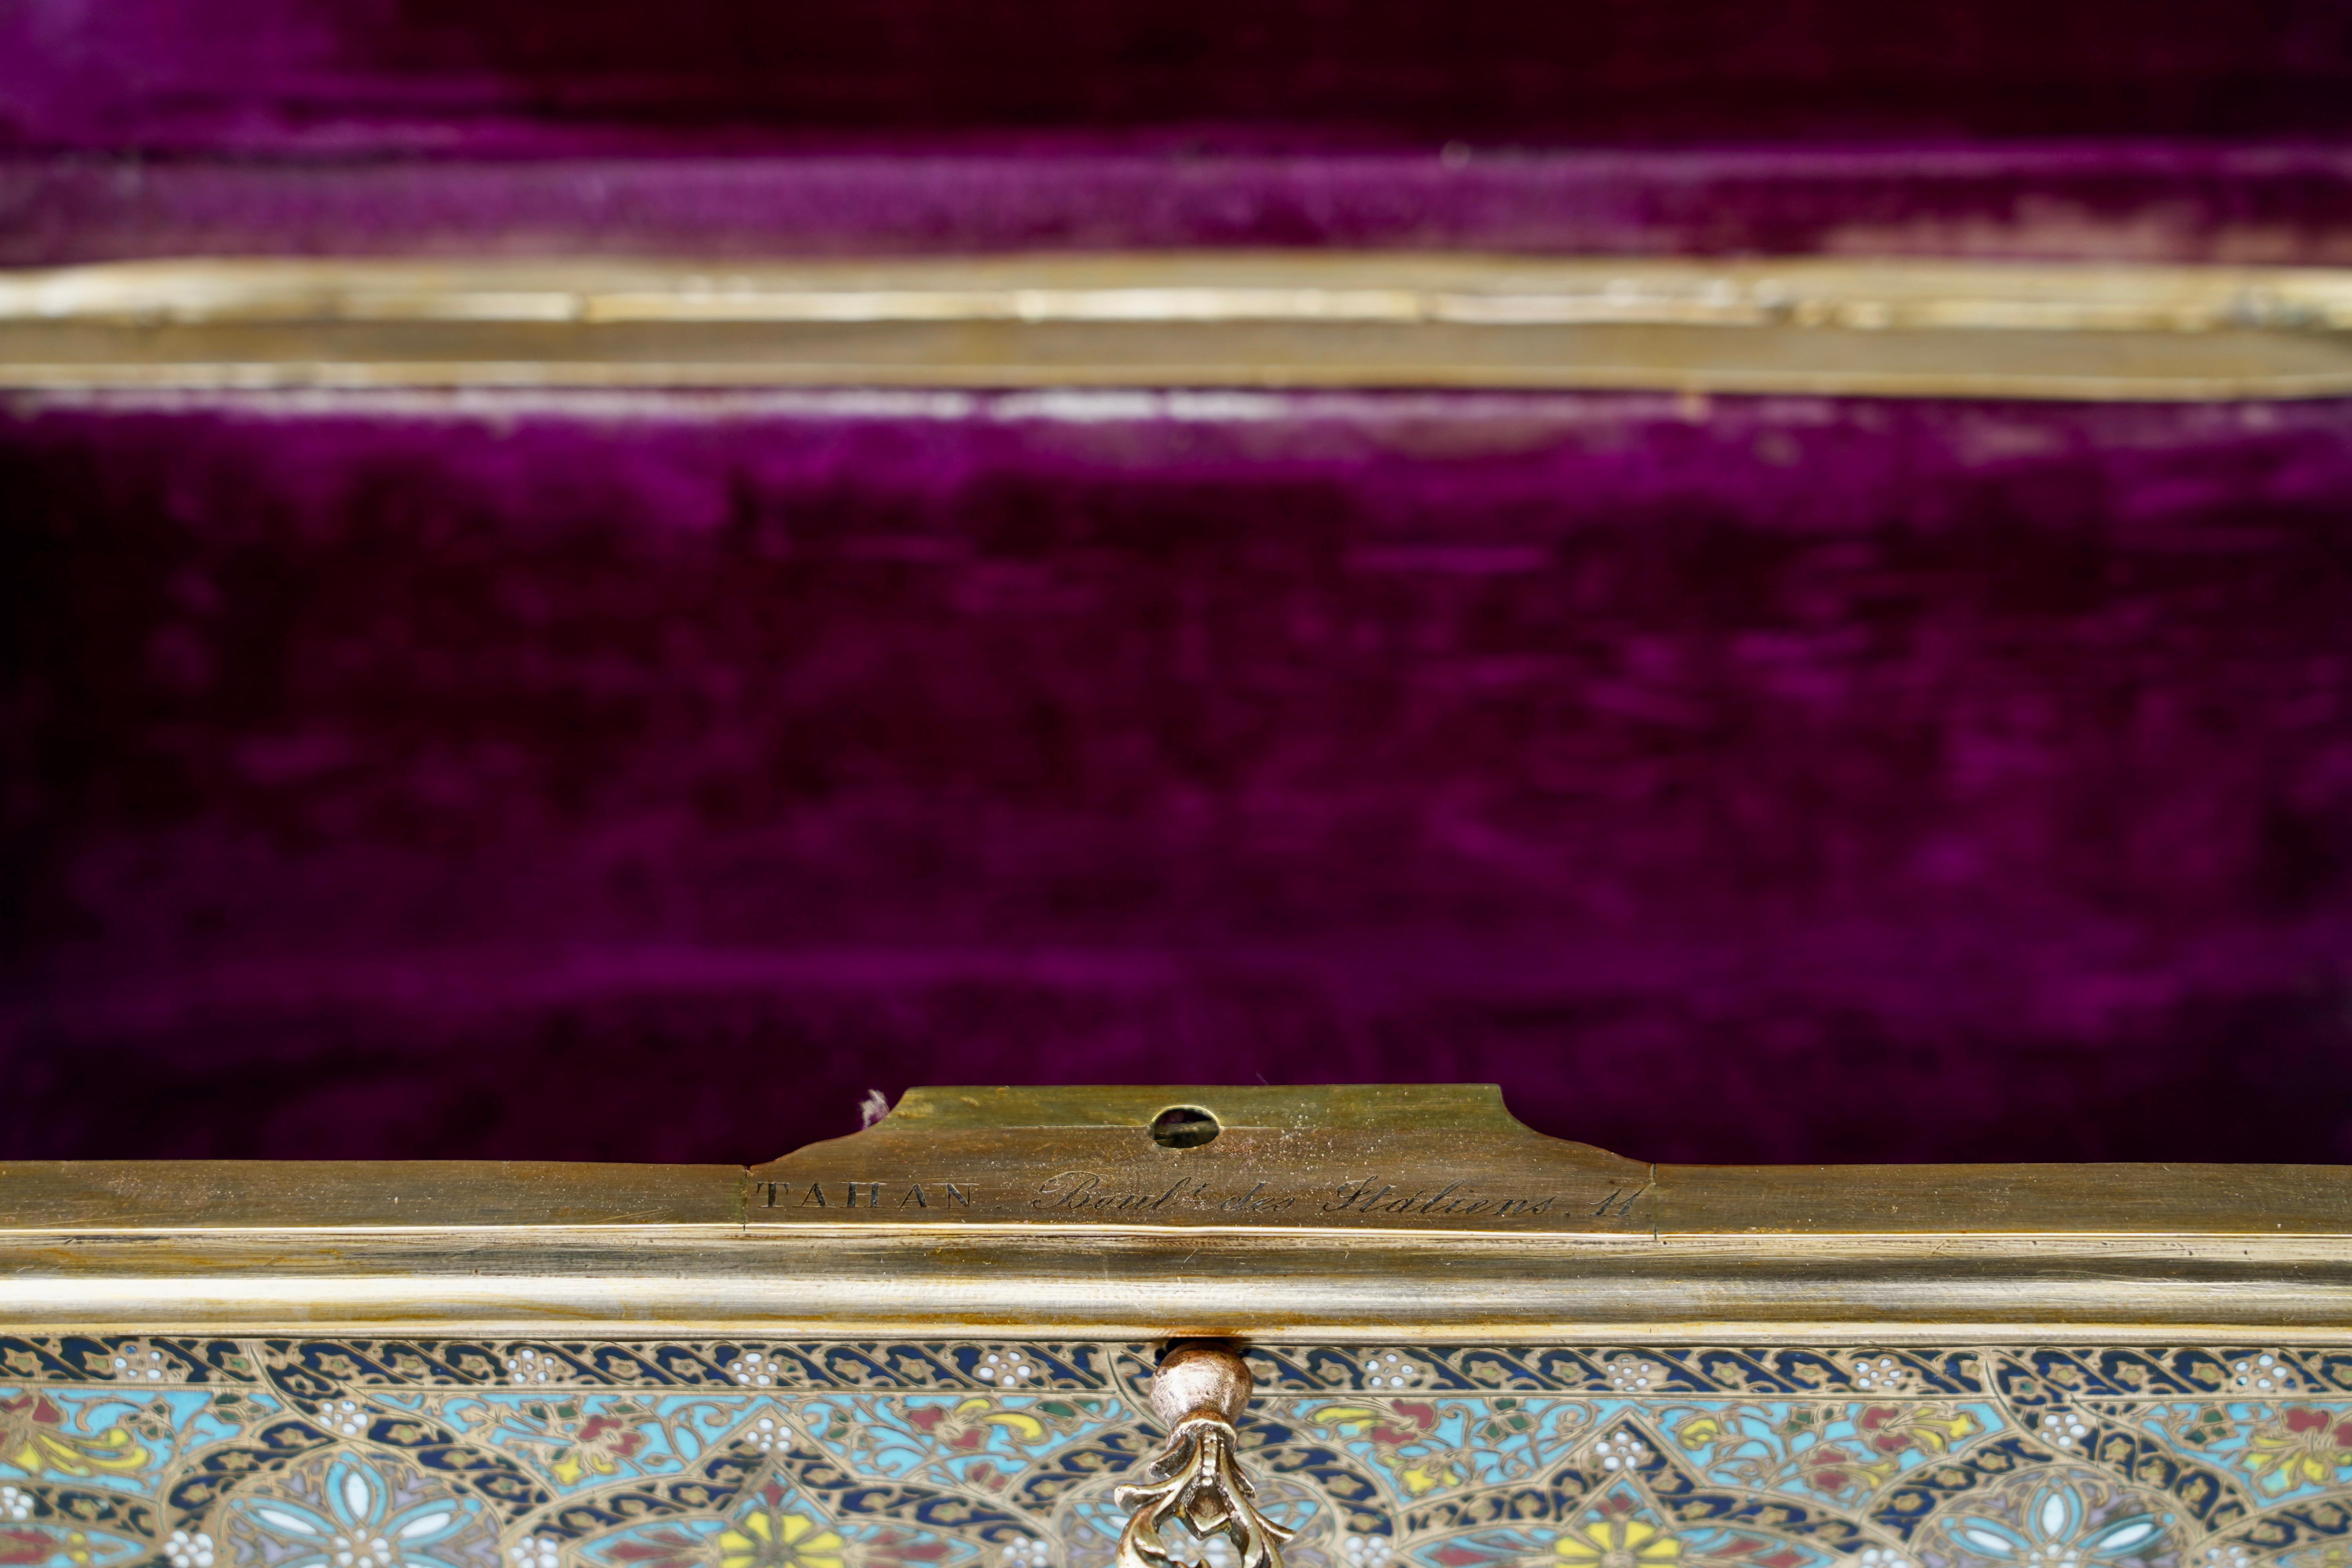 Late 19th Century Charming Enameled and Gilded Bronze Casket by Tahan, France, Circa 1870 For Sale